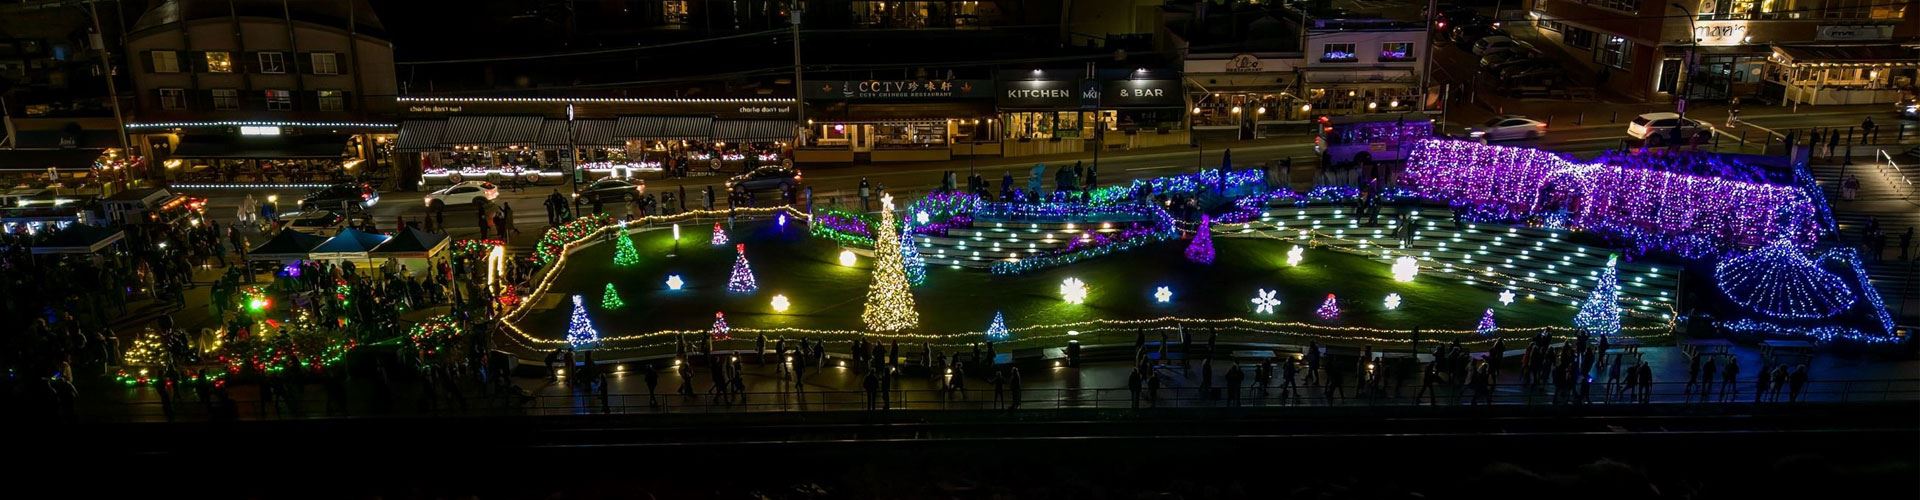 Christmas light display in park at nighttime. 